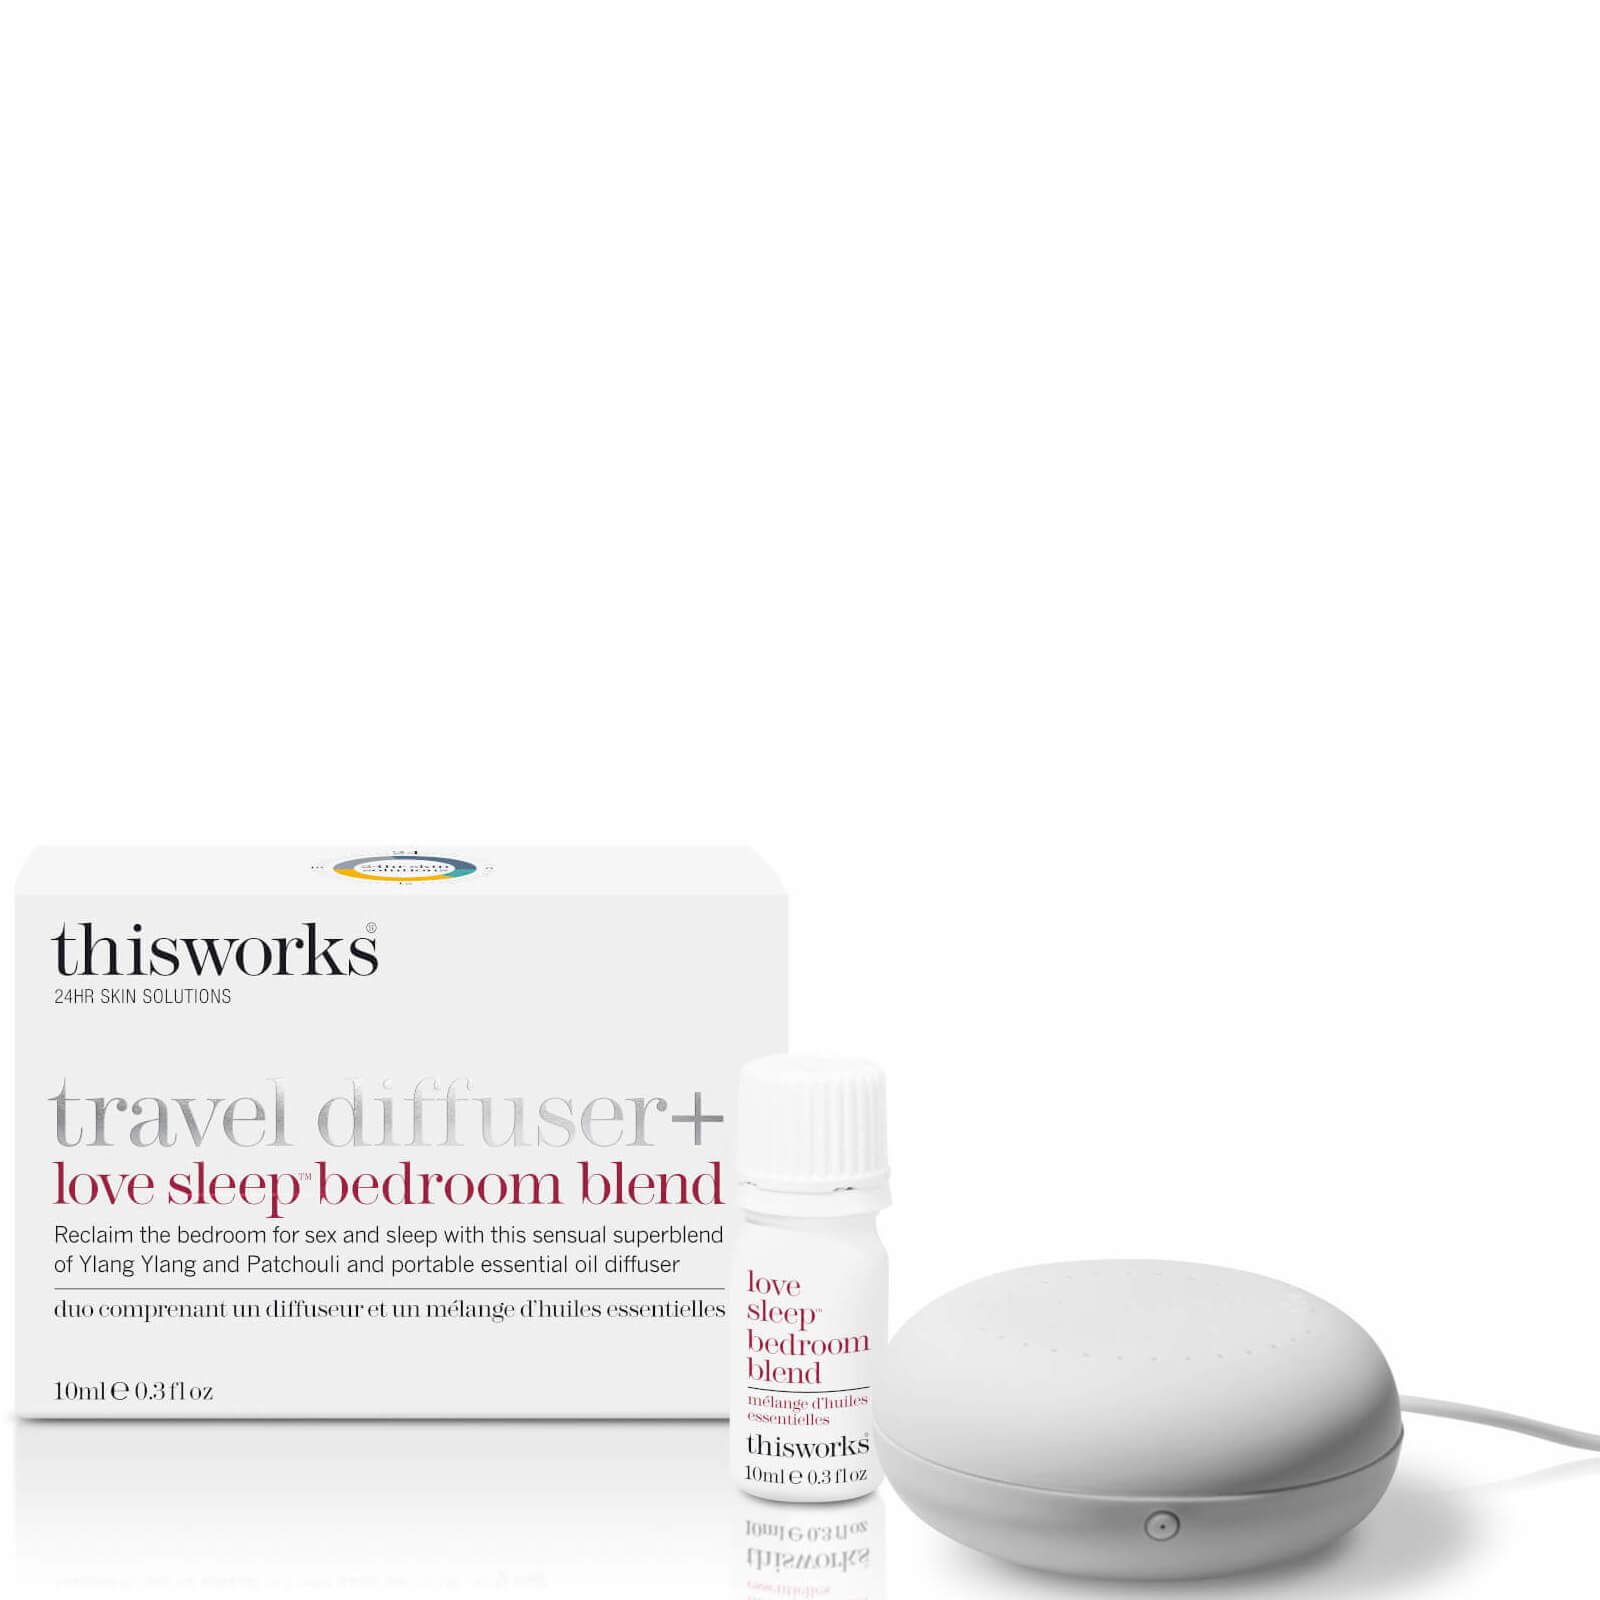 Body Care this works Travel Diffuser and Love Sleep Bedroom Blend